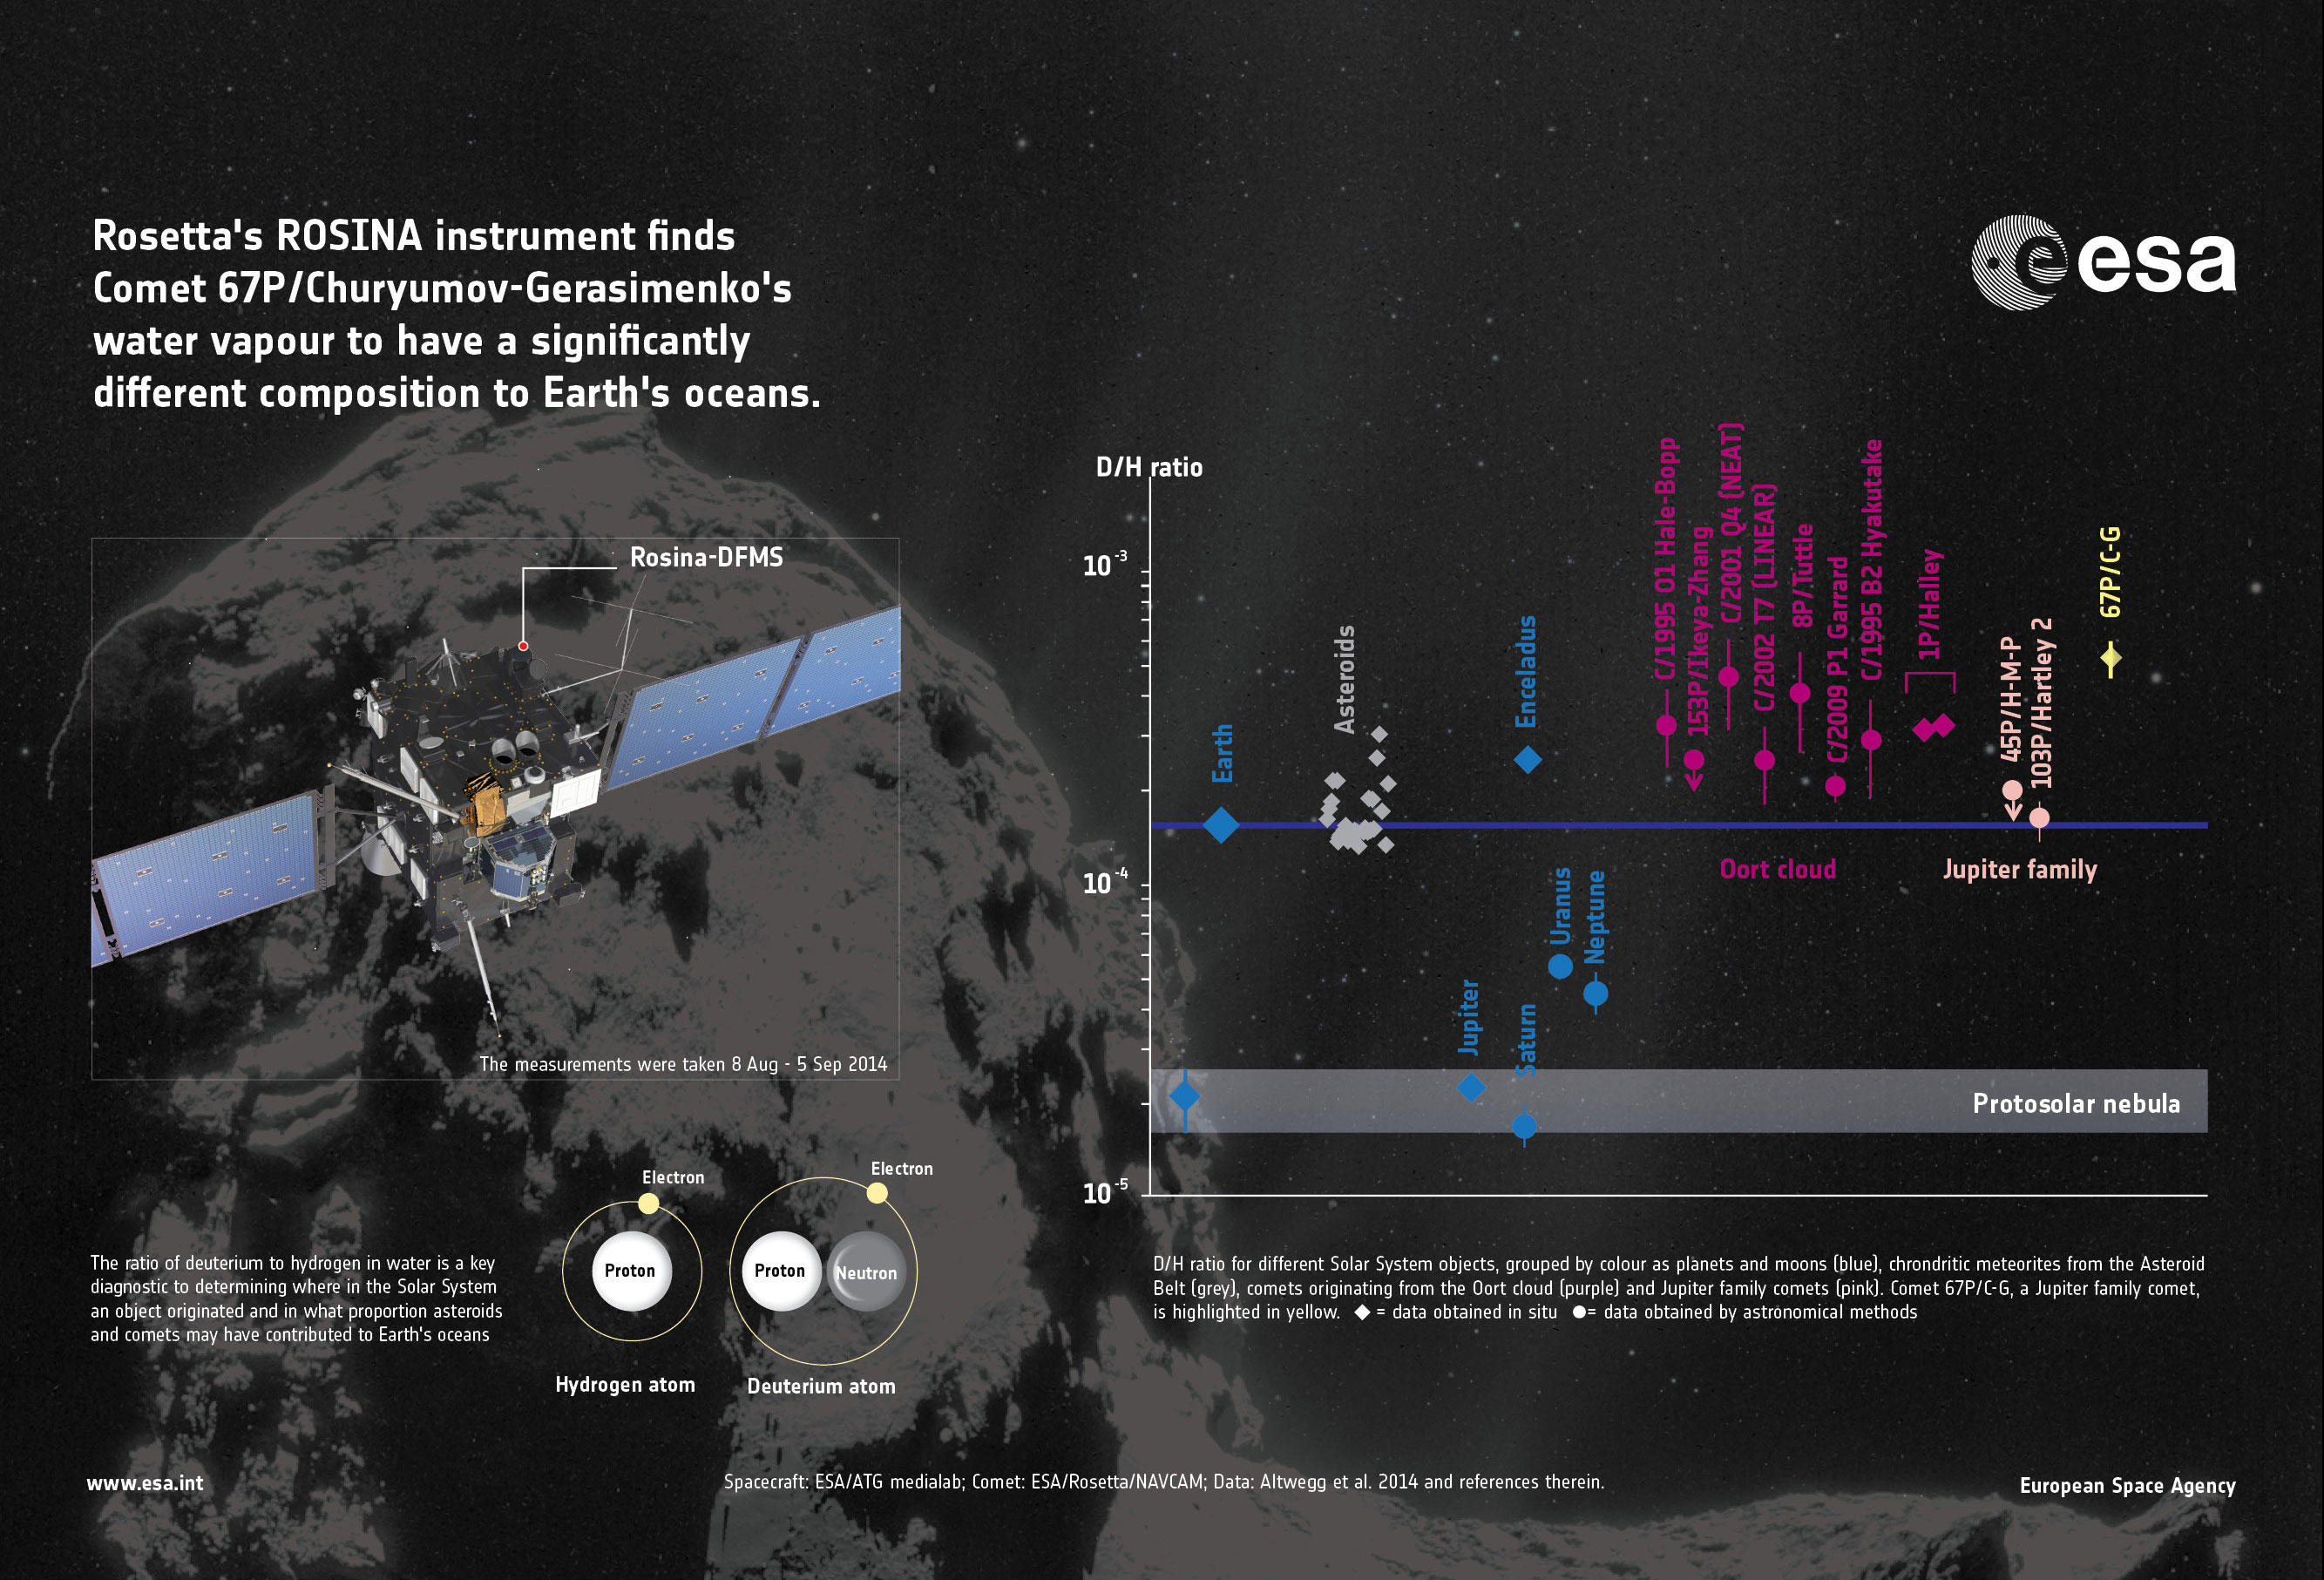 Rosetta’s measurement of the deuterium-to-hydrogen ratio (D/H) measured in the water vapour around Comet 67P/Churyumov–Gerasimenko. Deuterium is an isotope of hydrogen with an added neutron. The ratio of deuterium to hydrogen in water is a key diagnostic to determining where in the Solar System an object originated and in what proportion asteroids and/or comets contributed to Earth’s oceans. The graph displays the different values of D/H in water observed in various bodies in the Solar System. The data points are grouped by colour as planets and moons (blue), chondritic meteorites from the Asteroid Belt (grey), comets originating from the Oort cloud (purple) and Jupiter family comets (pink). Rosetta’s Jupiter-family comet is highlighted in yellow. The ratio for Earth’s oceans is 1.56 ×10–4 (shown as the blue horizontal line in the upper part of the graph). Credit: ESA/ATG medialab/Rosetta/NavCam/Altwegg